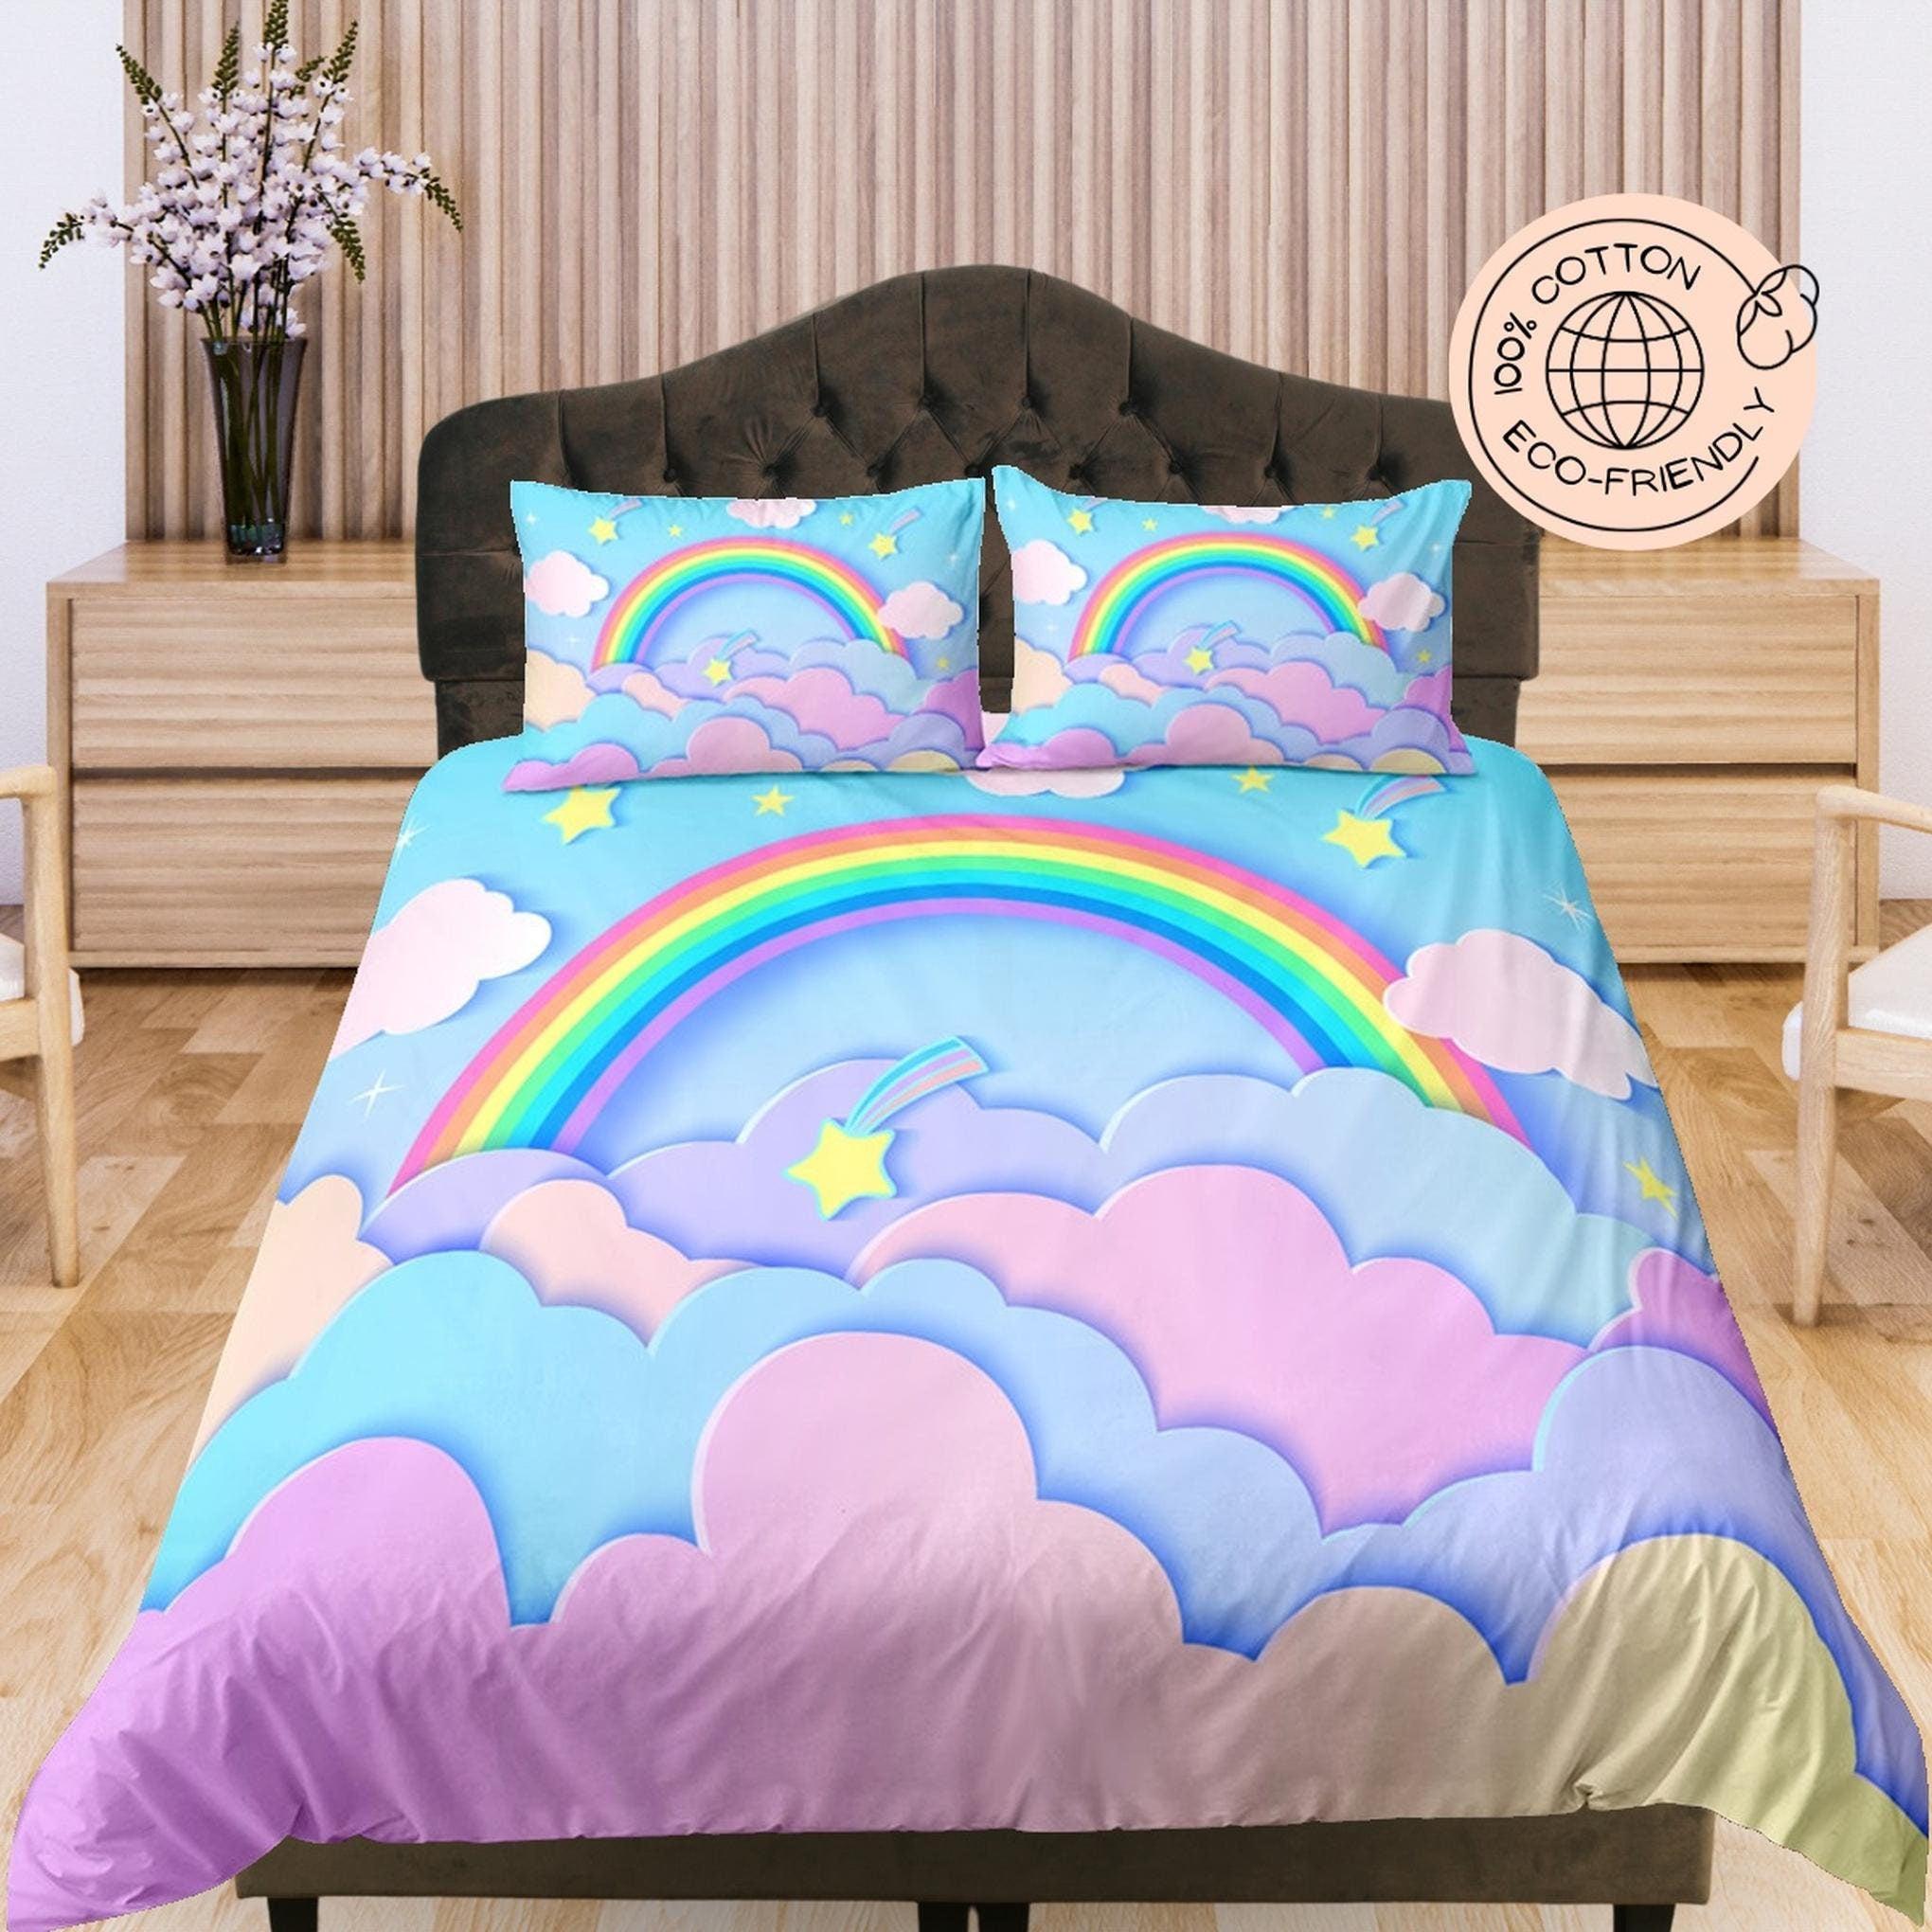 daintyduvet Colorful Sky Rainbow Cotton Duvet Cover Set for Kids, Pastel Colors, Purple and Pink Toddler Bedding, Baby Zipper Bedding, Nursery Bedding